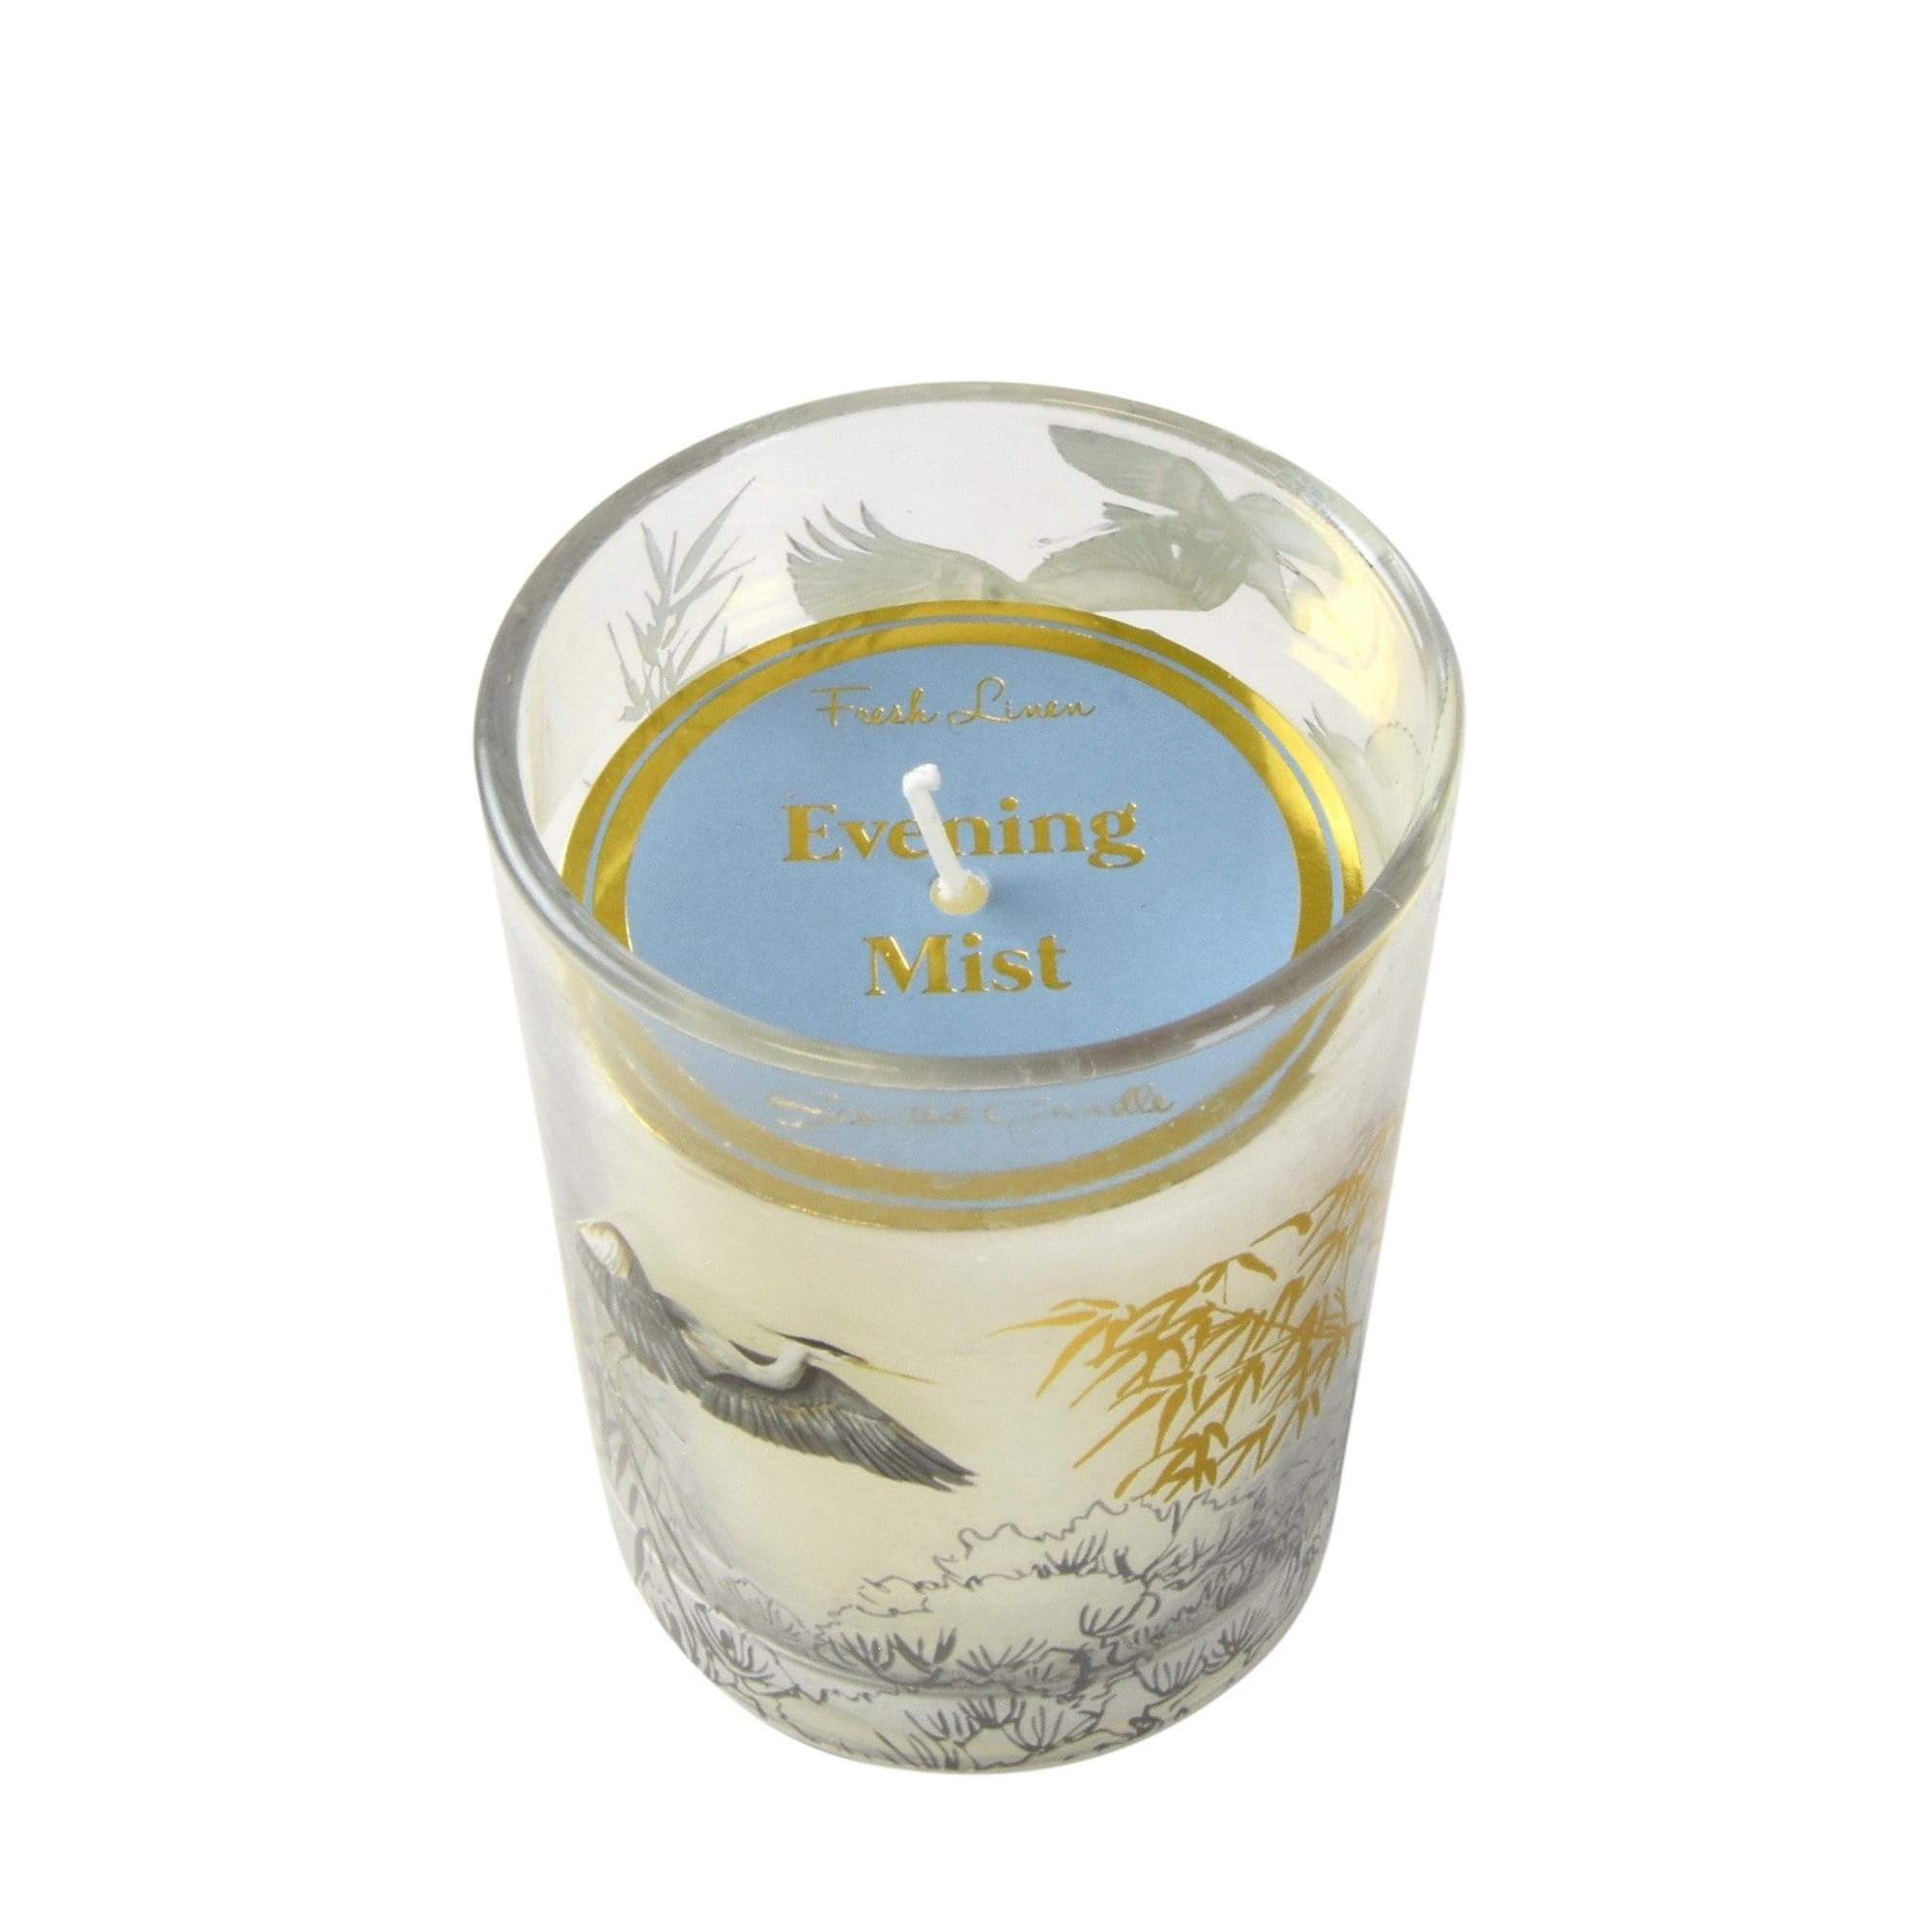 Clean Cotton Scented Candle